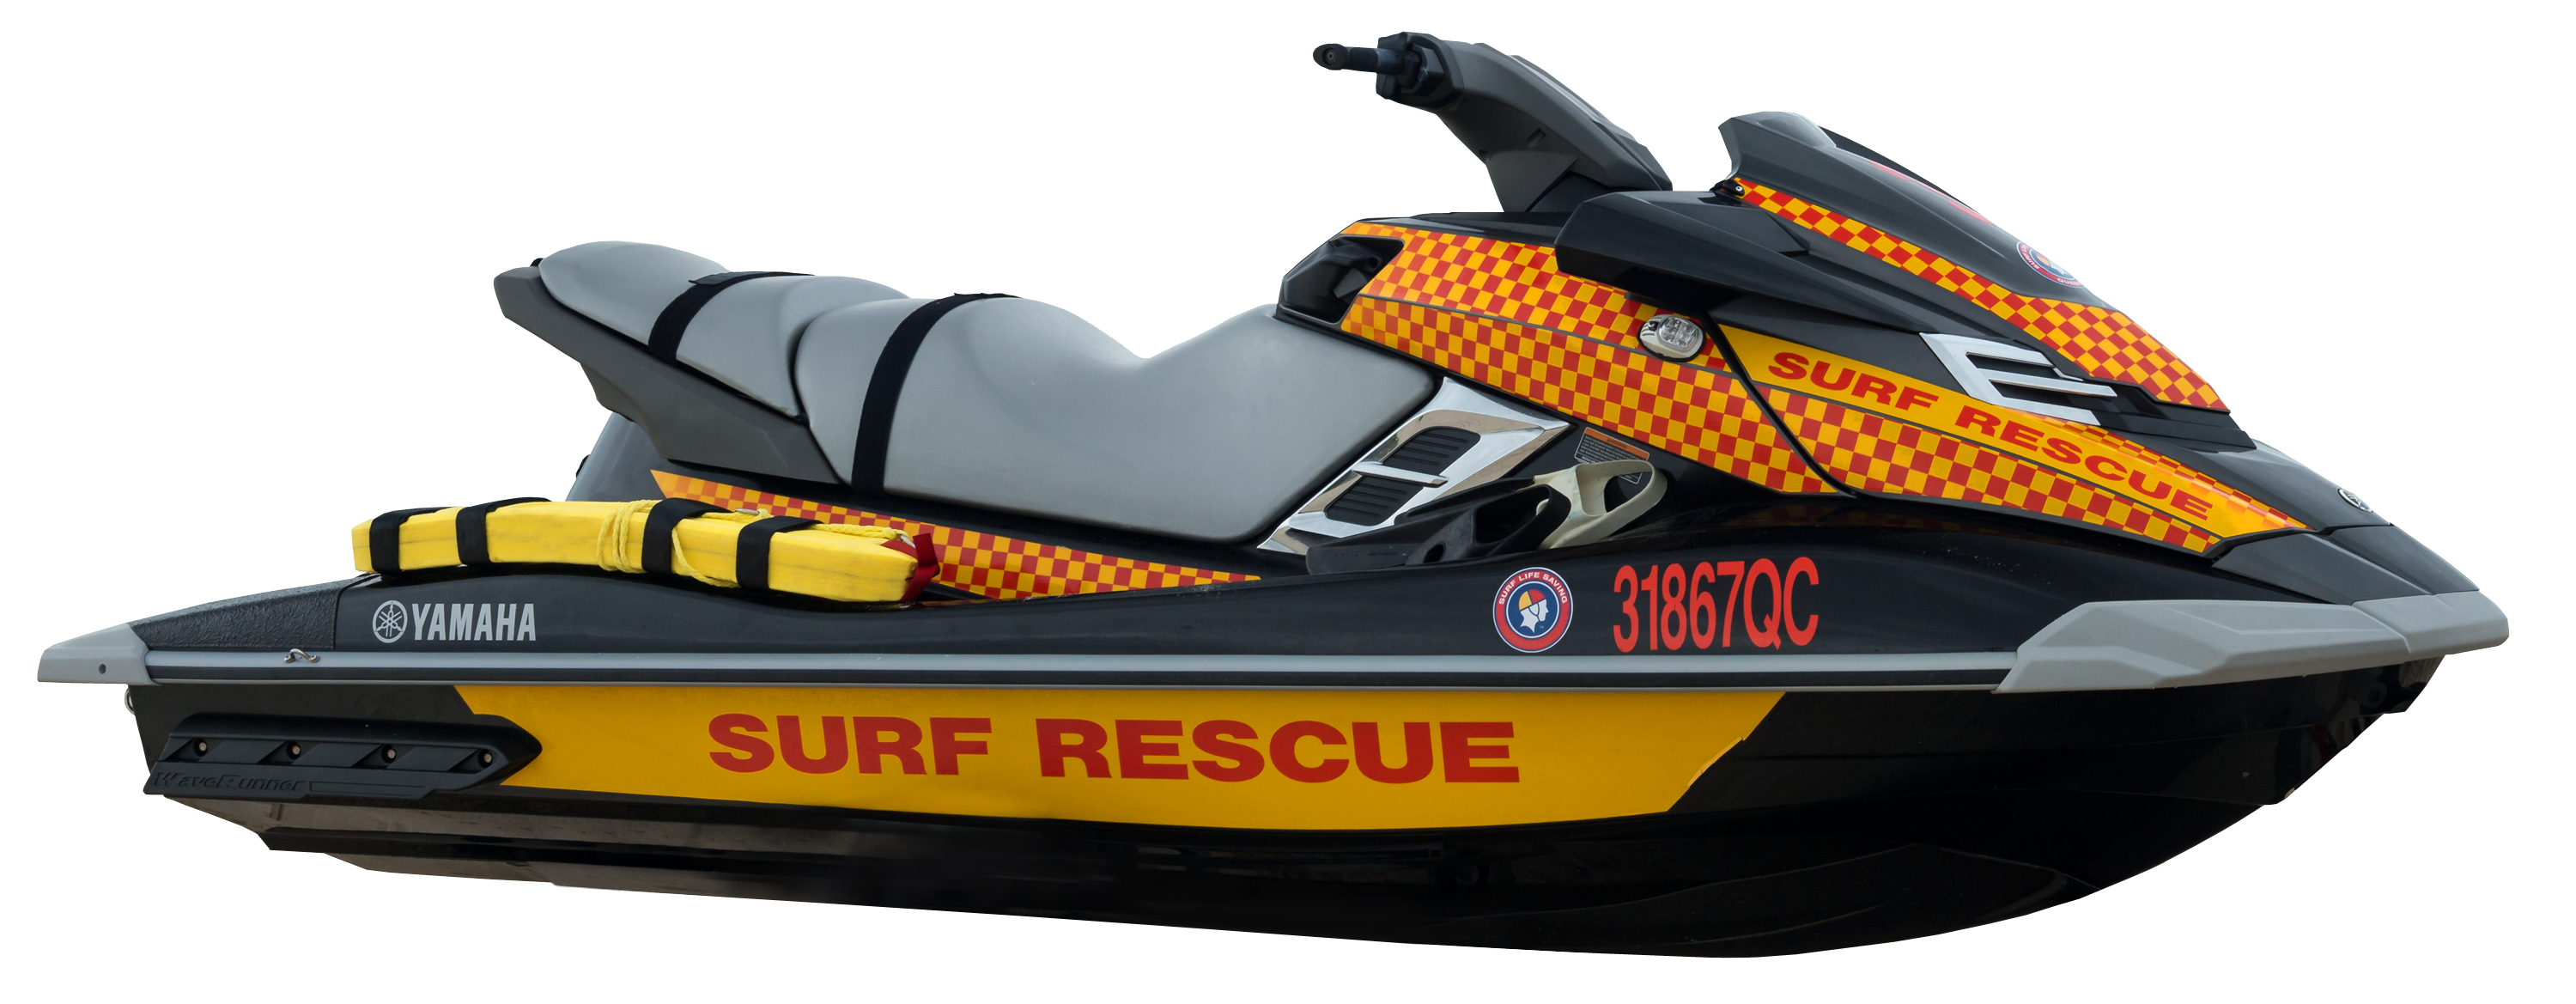 Rescue Gear | Surf Life Saving Lotteries